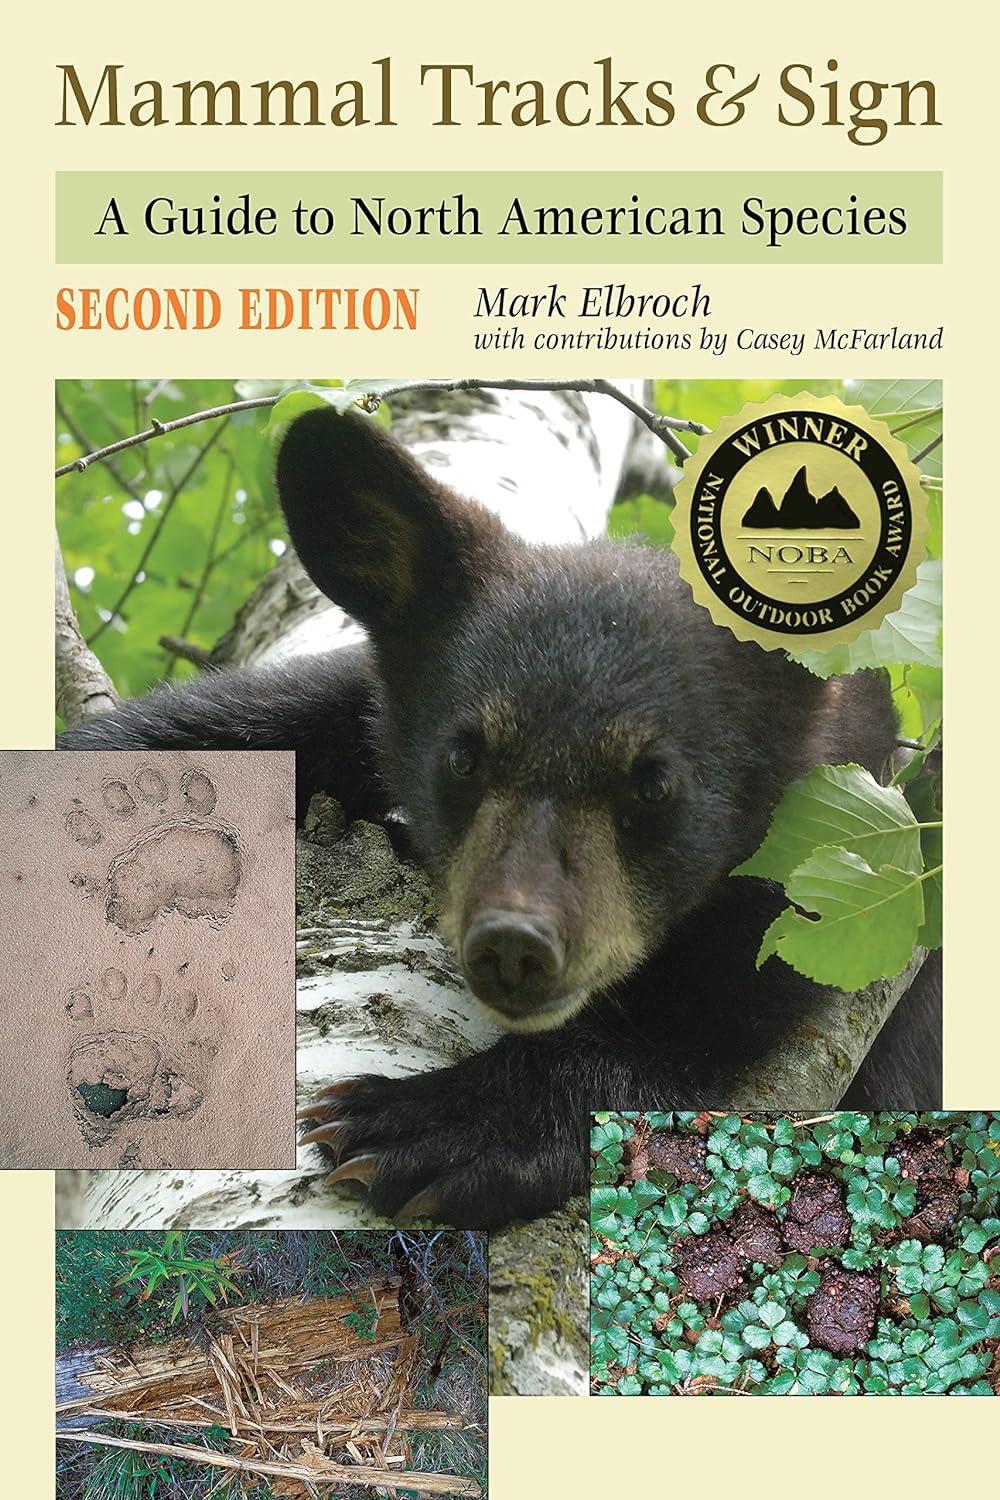 mammal tracks and sign a guide to north american species 2nd edition mark elbroch, casey mcfarland